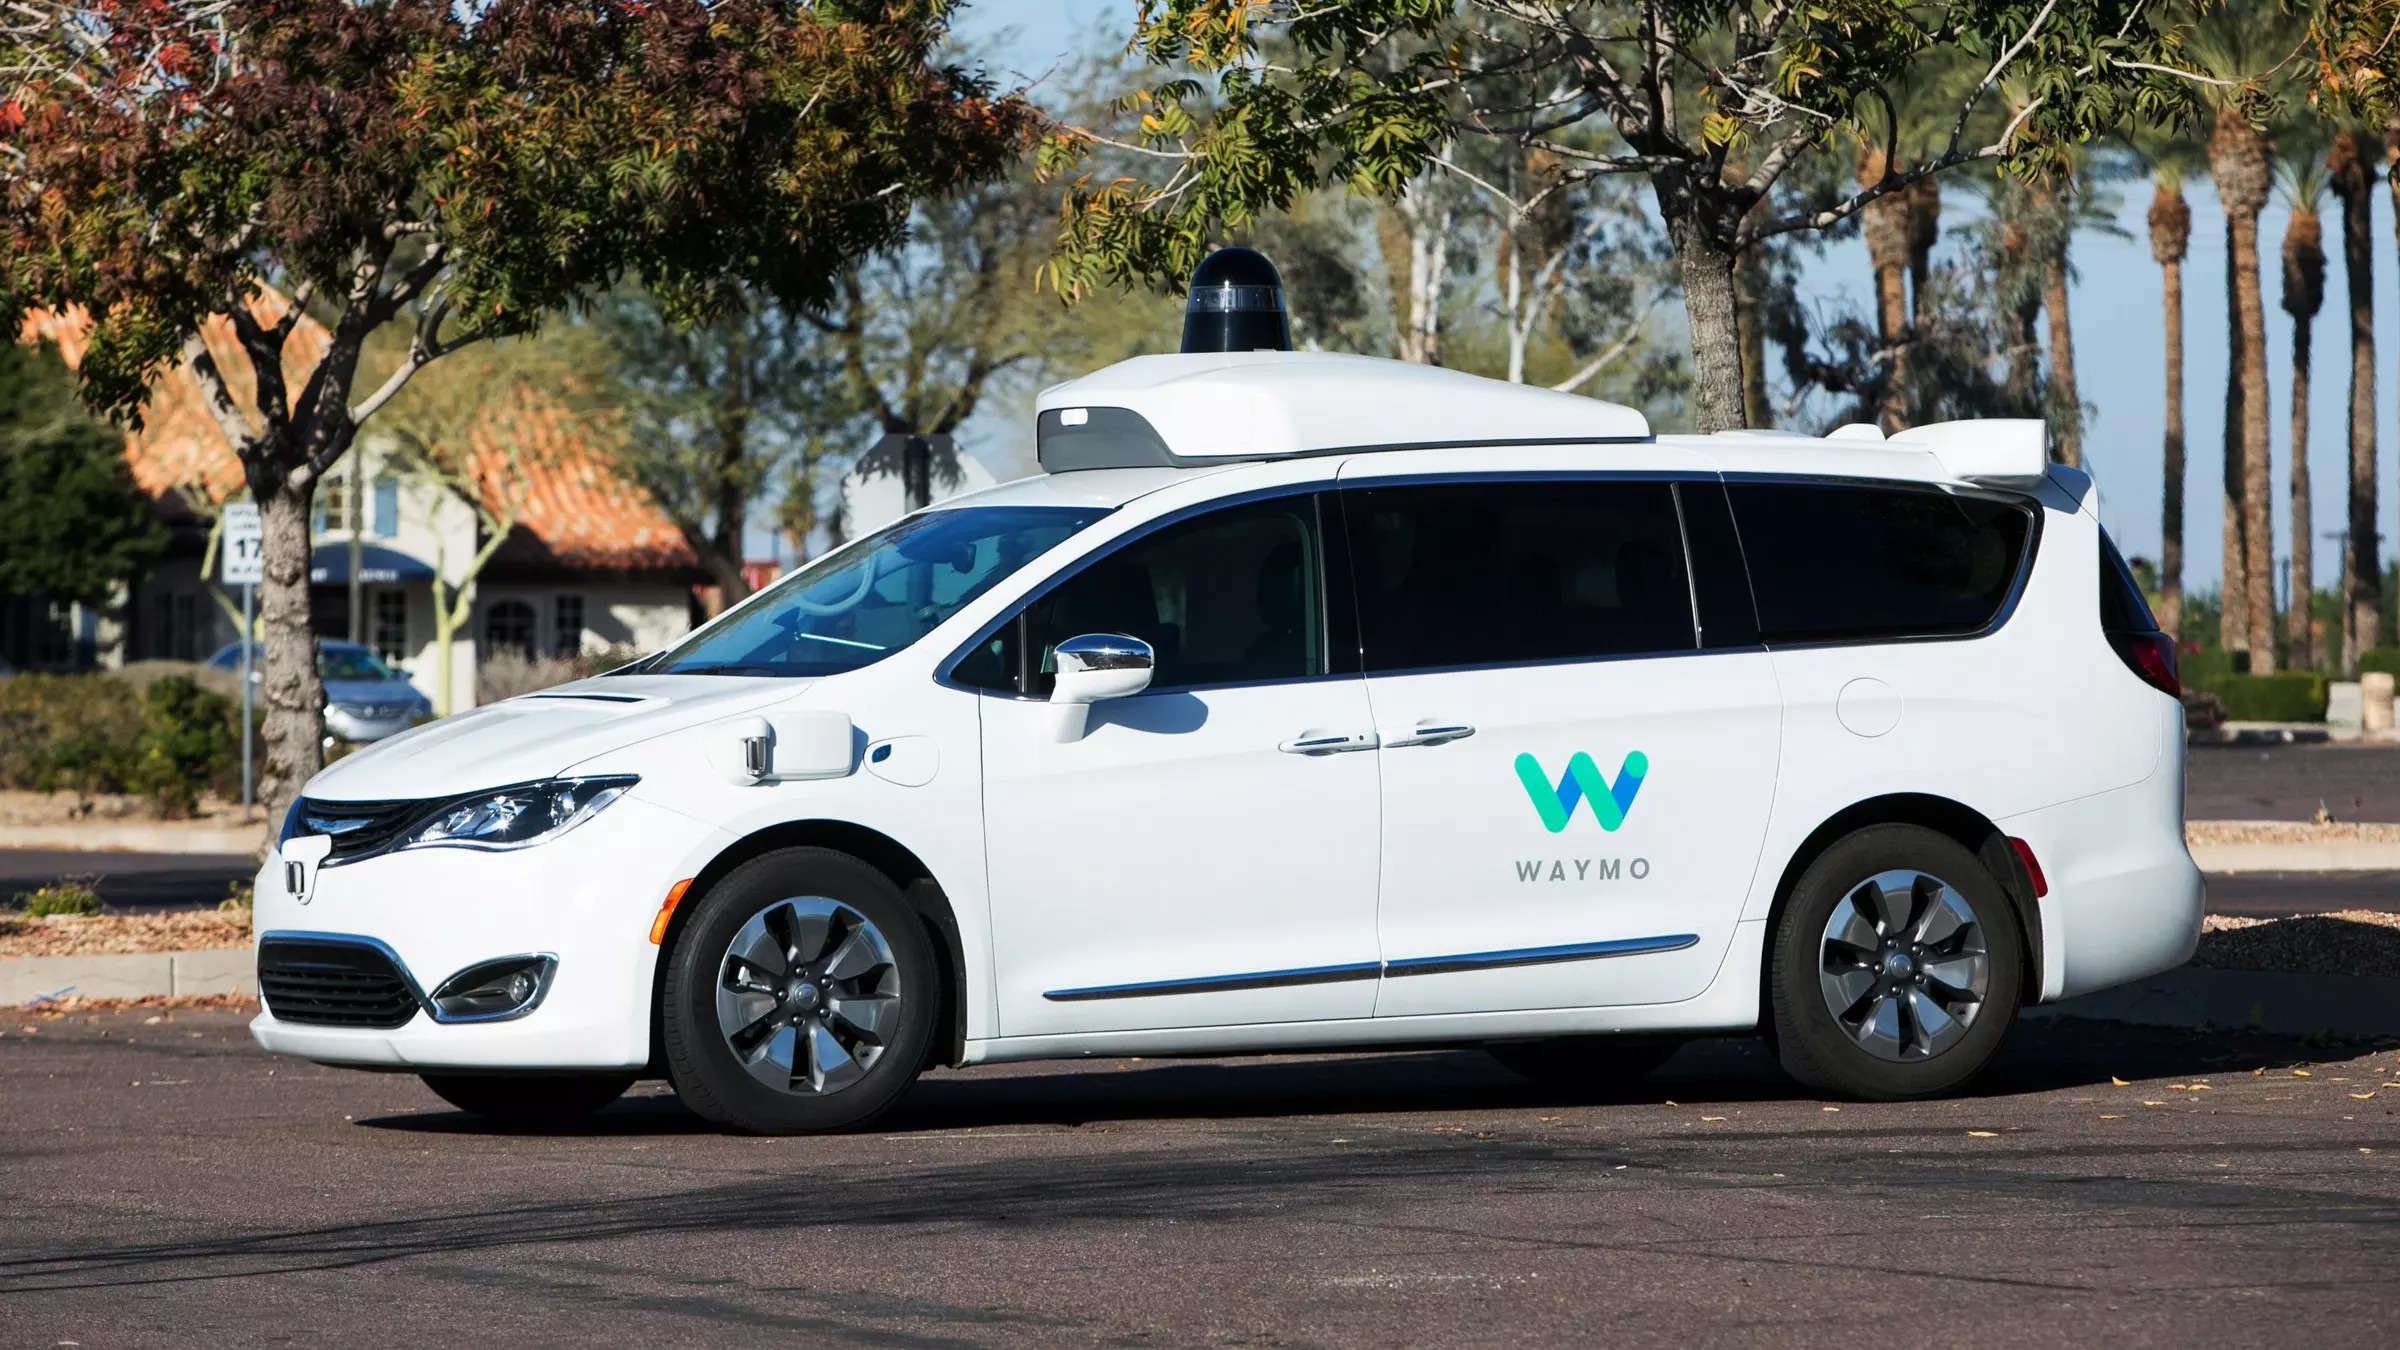  The companies said their extended collaboration will include analyzing the operational capacity of Waymo Via, which covers trucking to last-mile deliveries, to address customer needs.